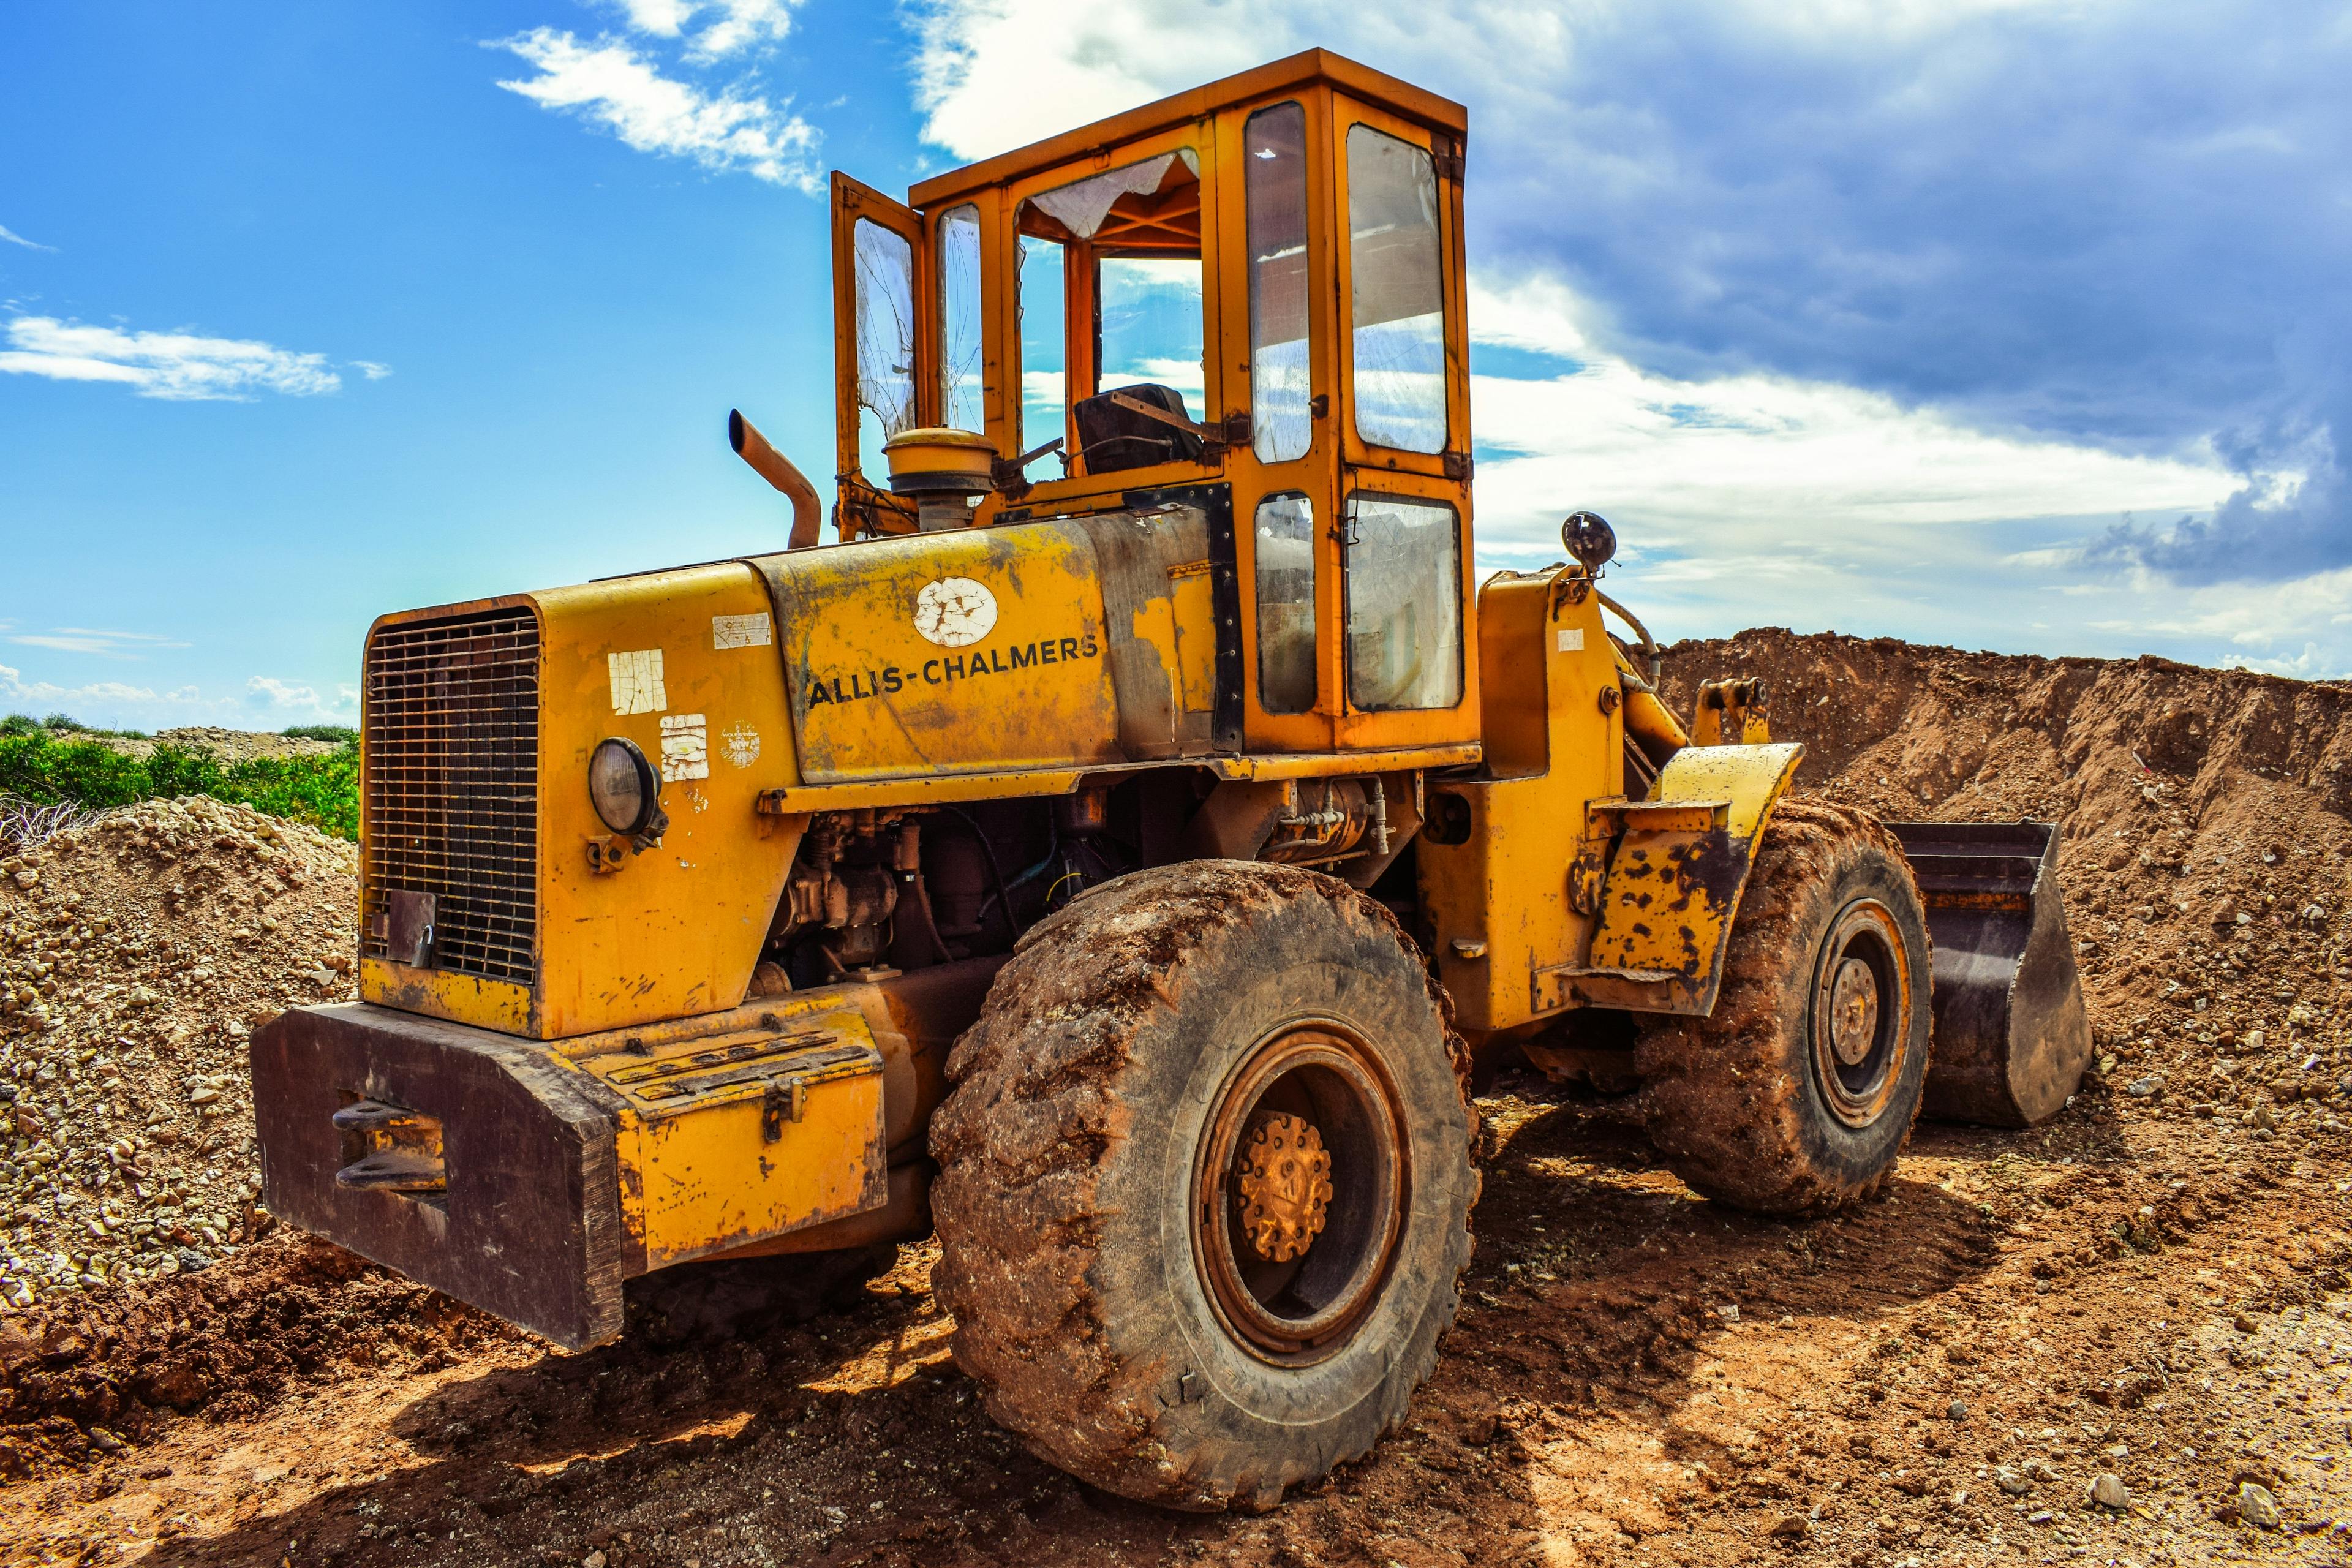 Tampering with GPS trackers can effect your heavy equipment